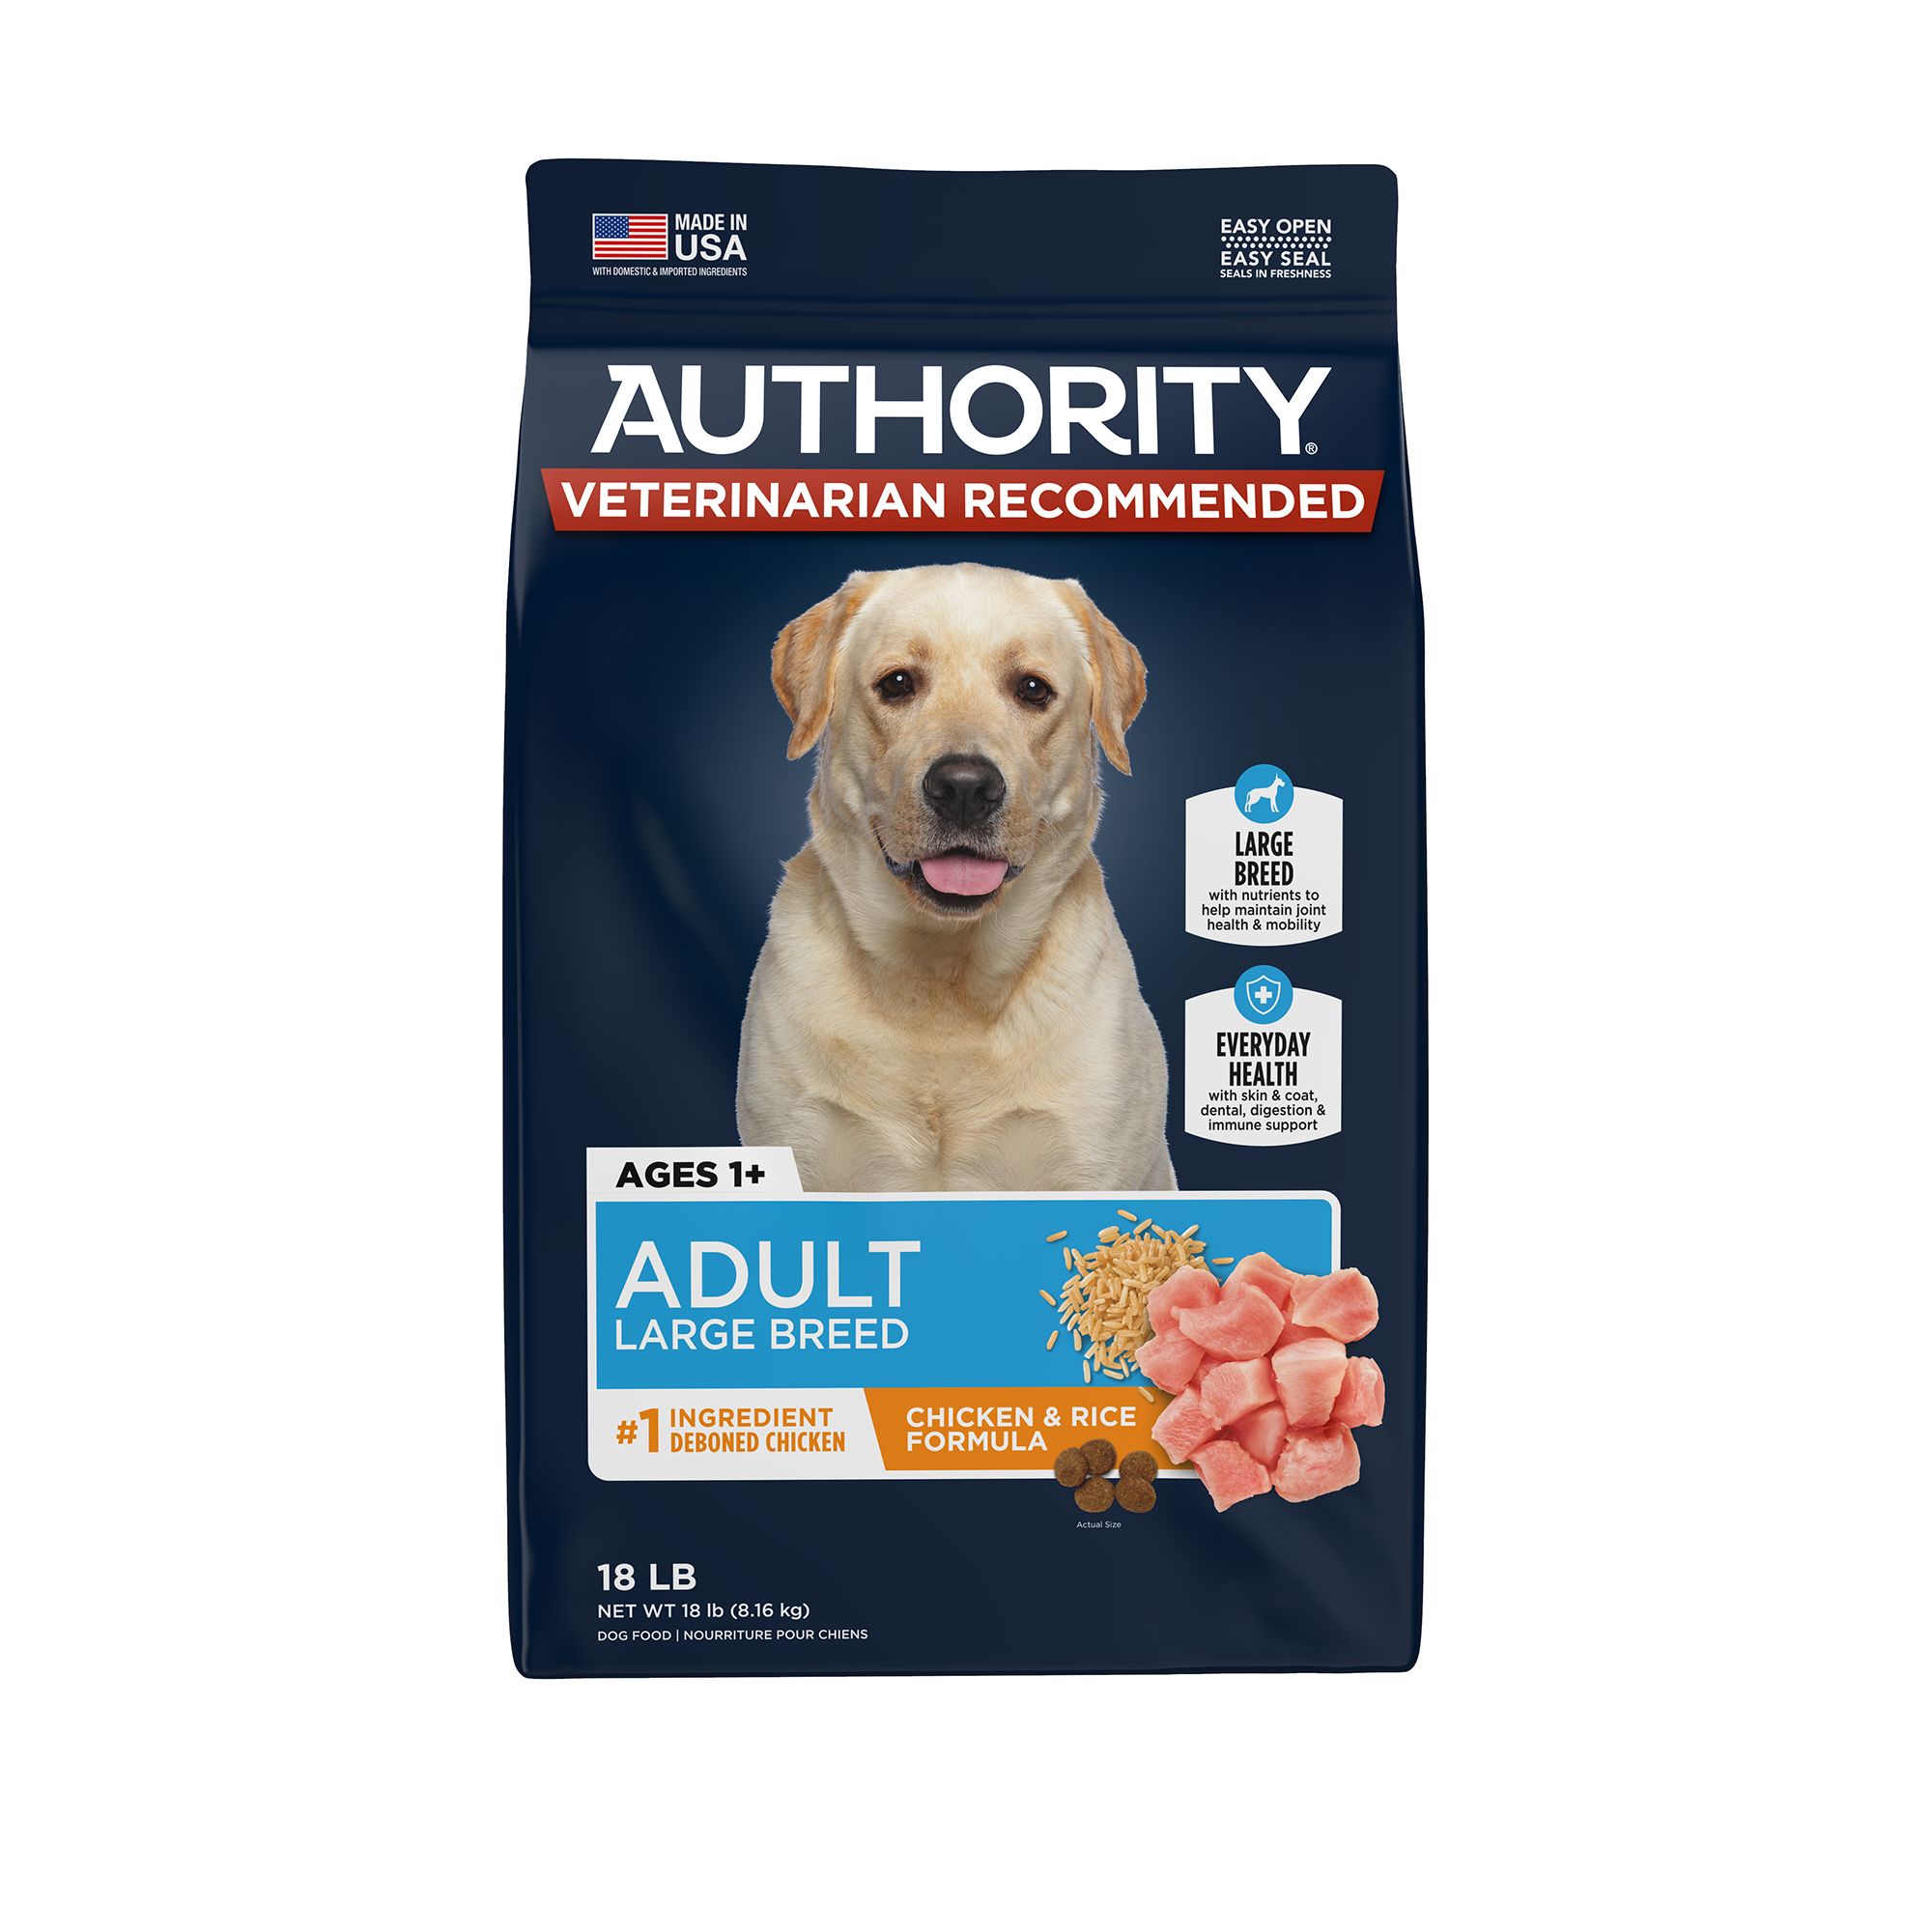 Authority® Everyday Health Large Breed Adult Dry Dog Food Chicken